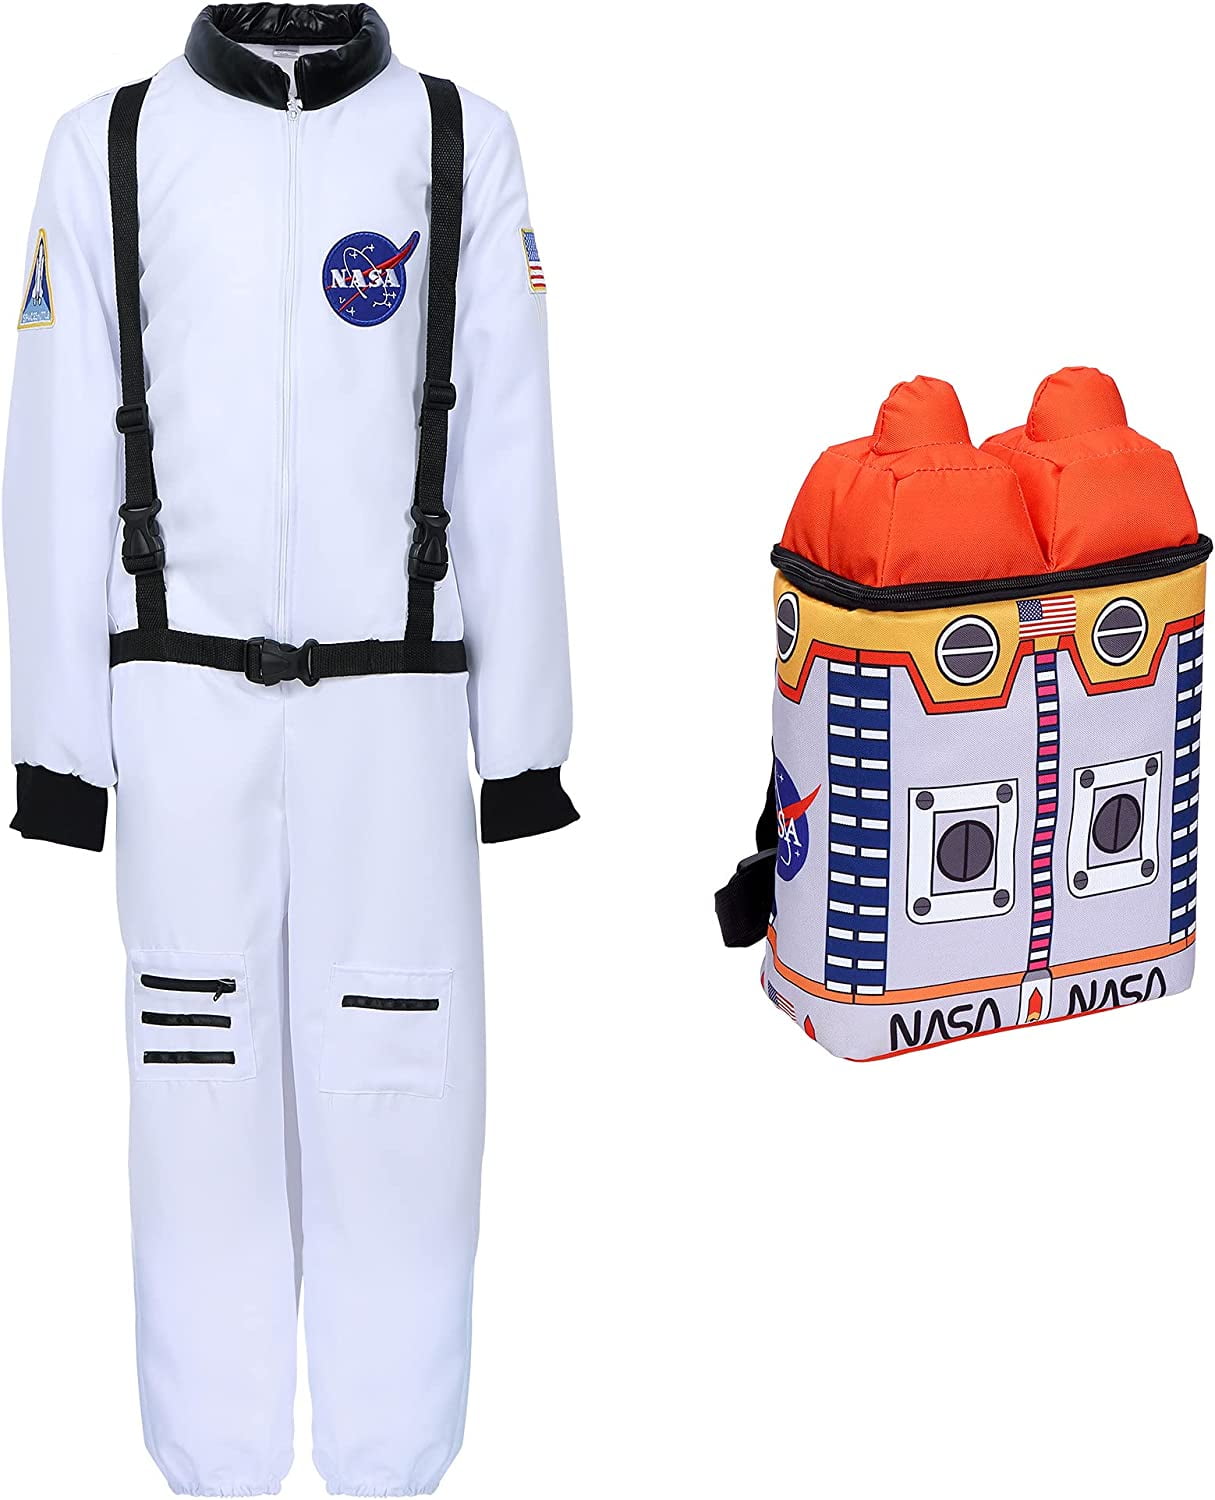 Astronaut Children's Dress Up with Space Rocket Bag for Kids Aged 3-12, S 